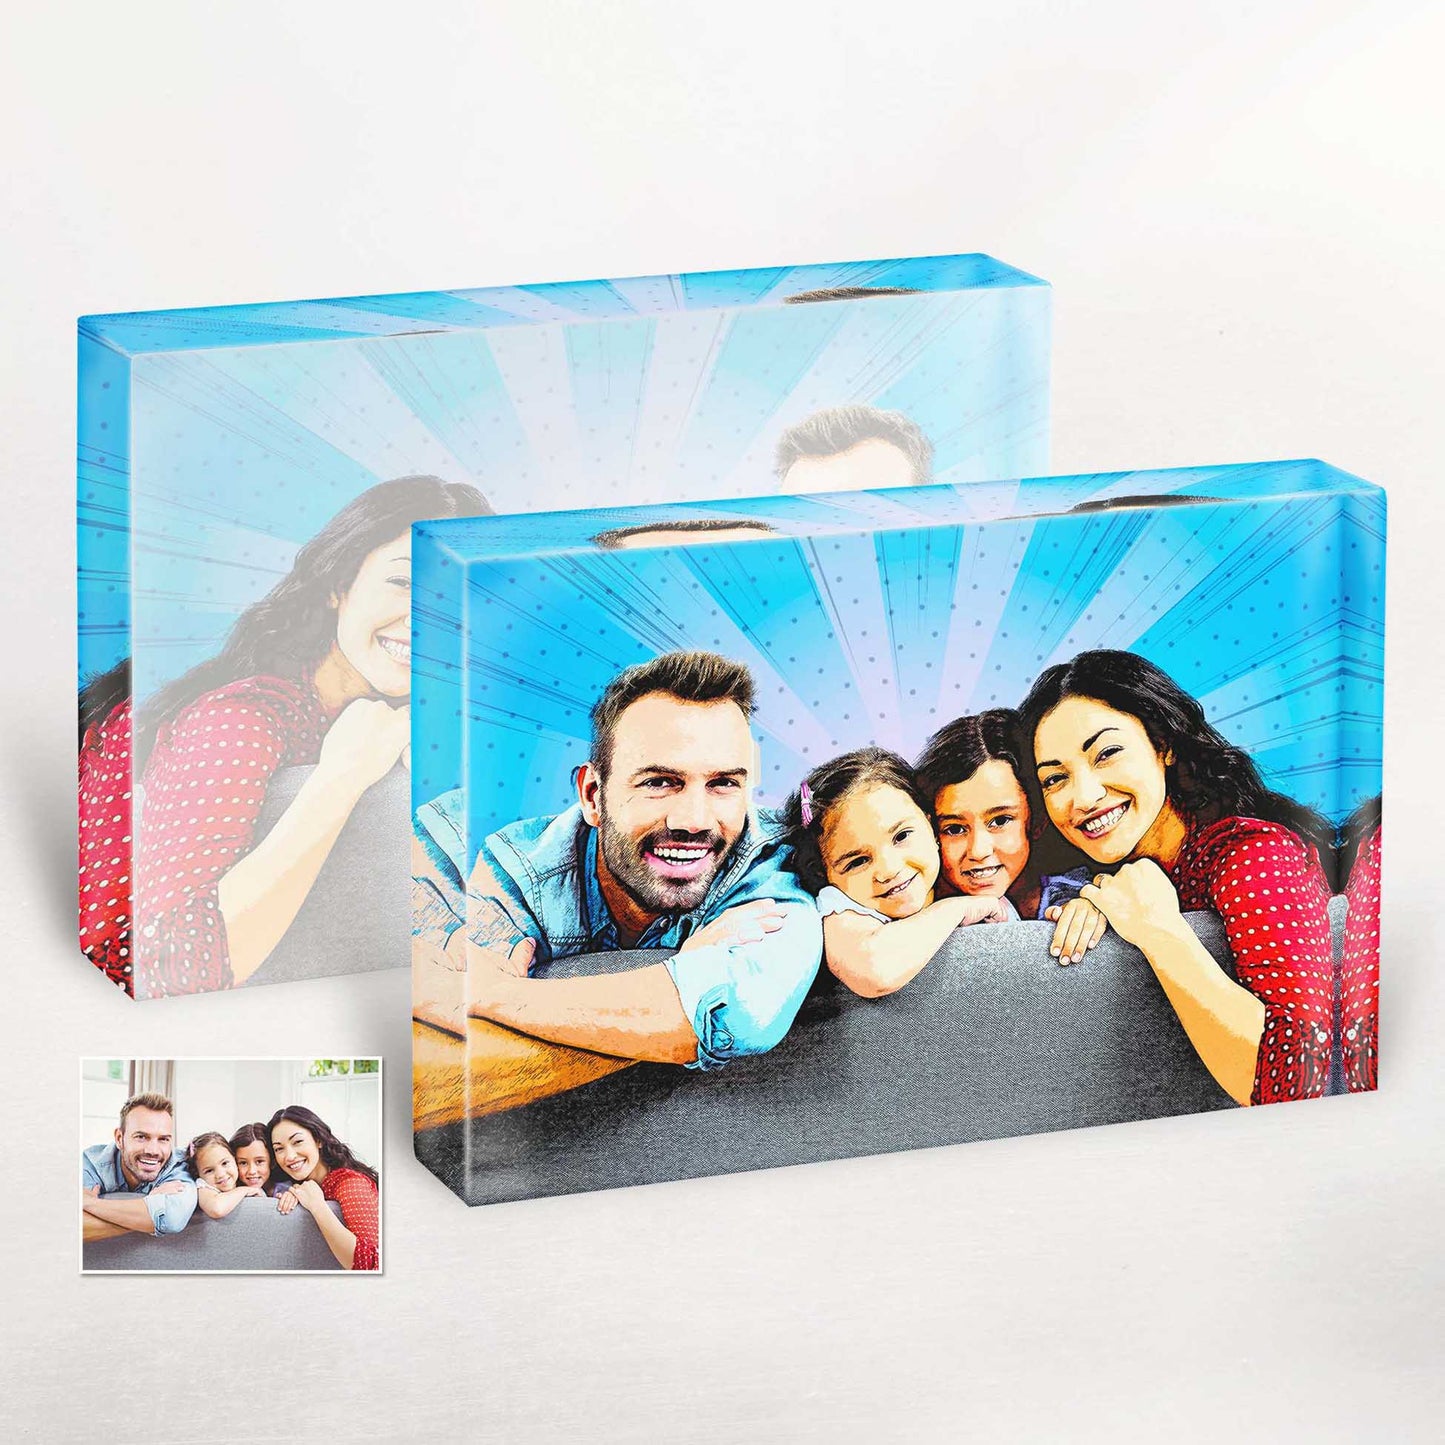 Capture the essence of joy and playfulness with our Personalised Cartoon Comic Acrylic Block Photo. Its fresh and original design brings a burst of fun to your home decor, radiating happiness and creating a unique focal point.